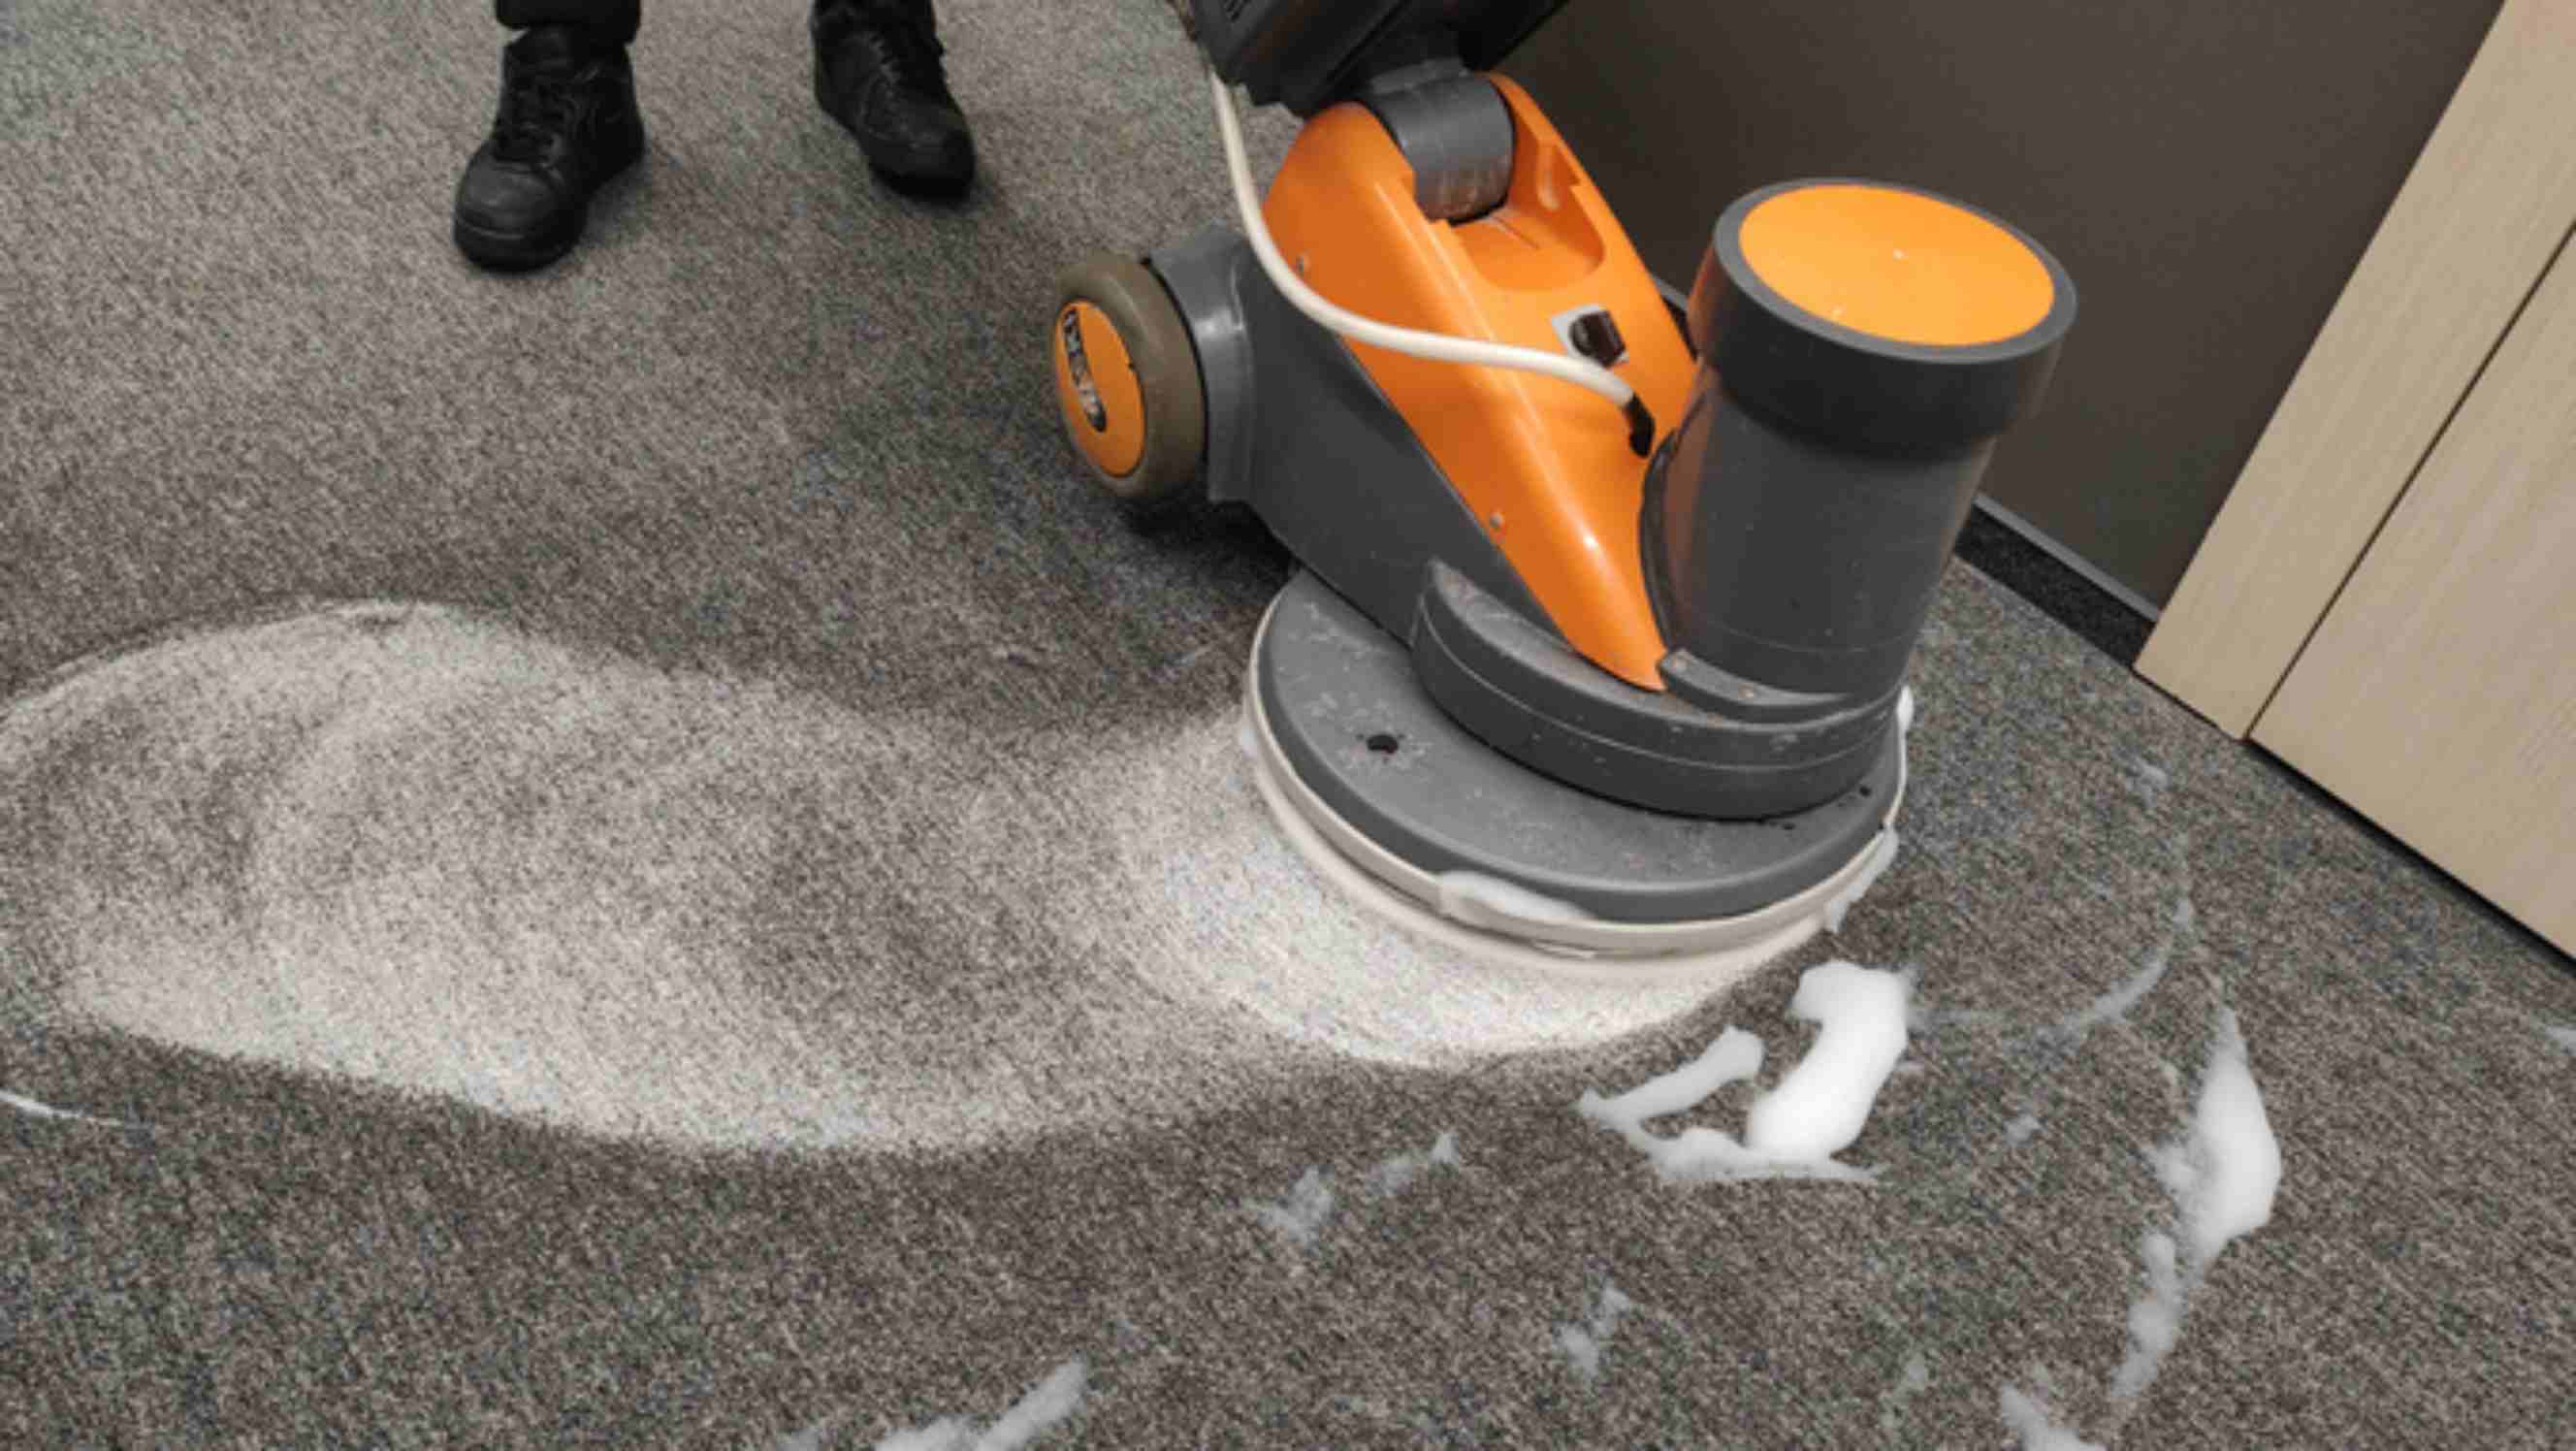 Steam cleaning carpets vs. shampooing - a person cleaning a gray carpet using a carpet shampooer